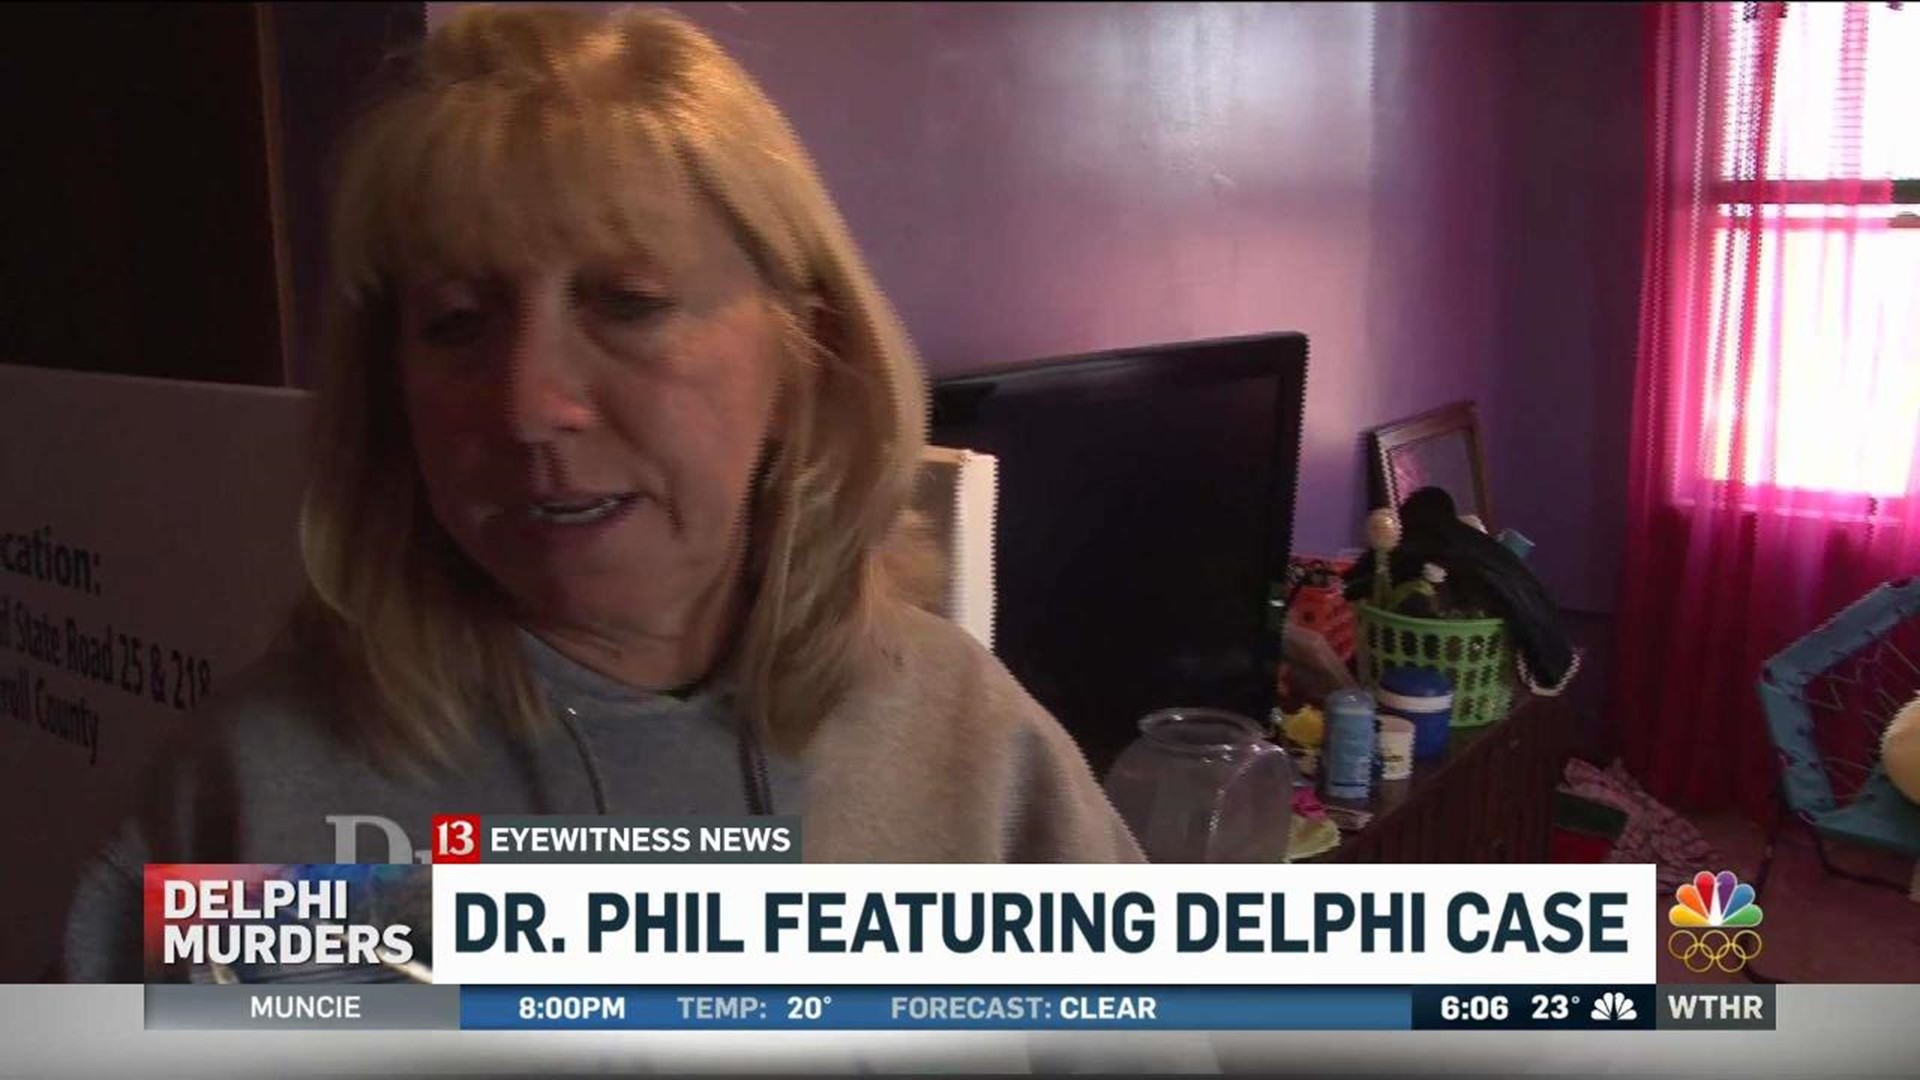 Delphi murders discussed Wednesday on Dr. Phil